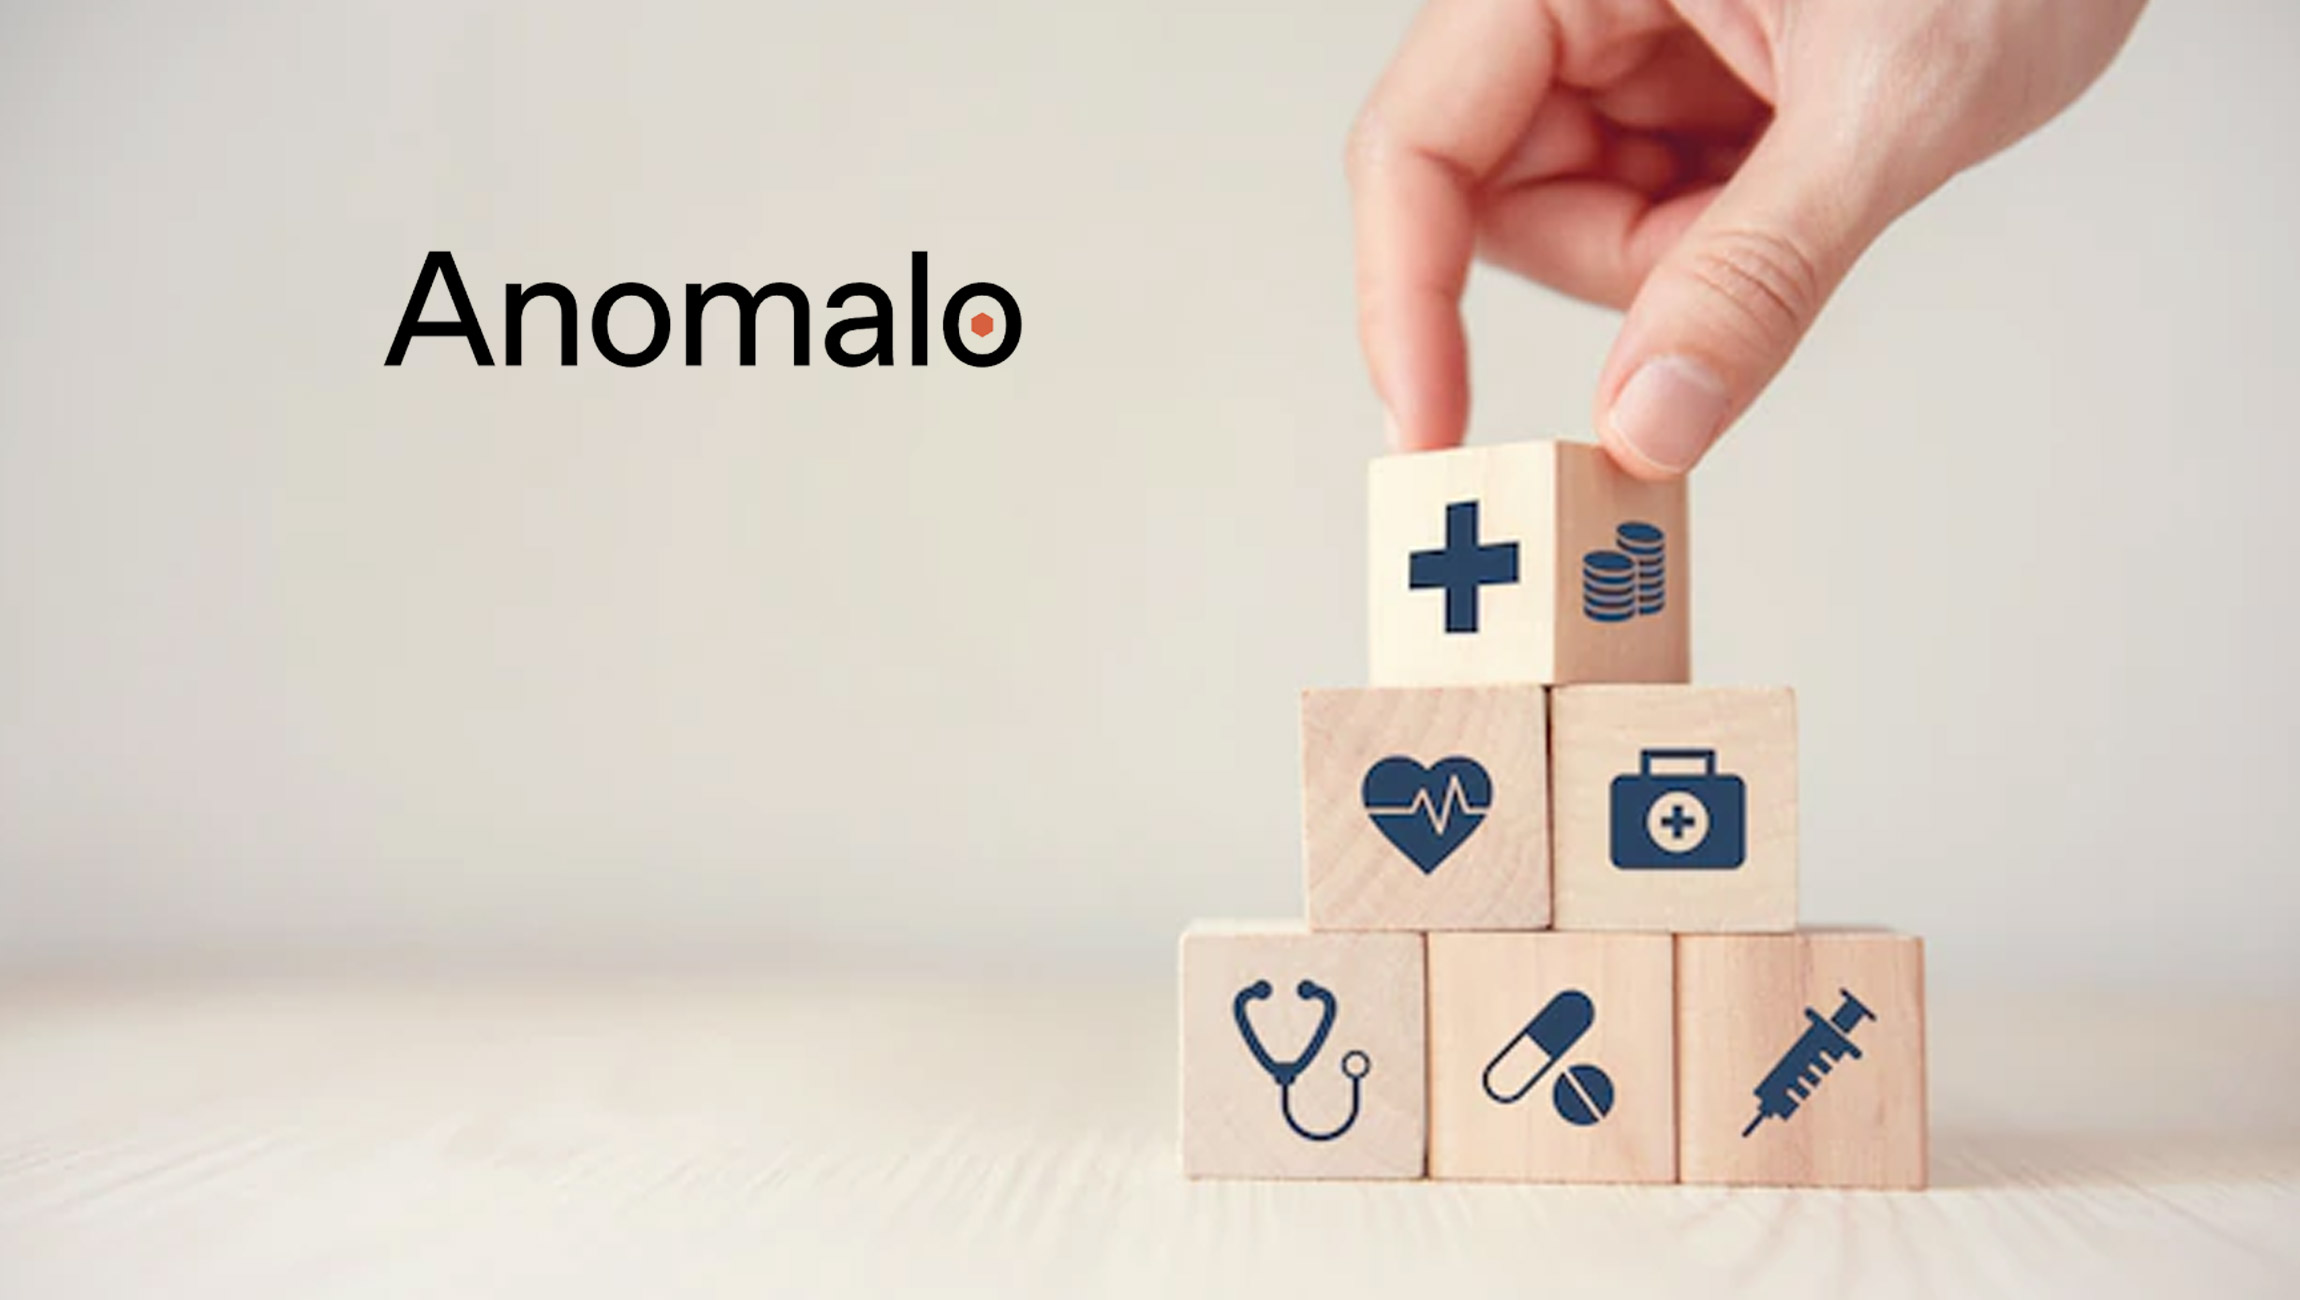 Anomalo AI Raises 33M in NVP-Led $1M Series A Round Led by MillerTechCrunch